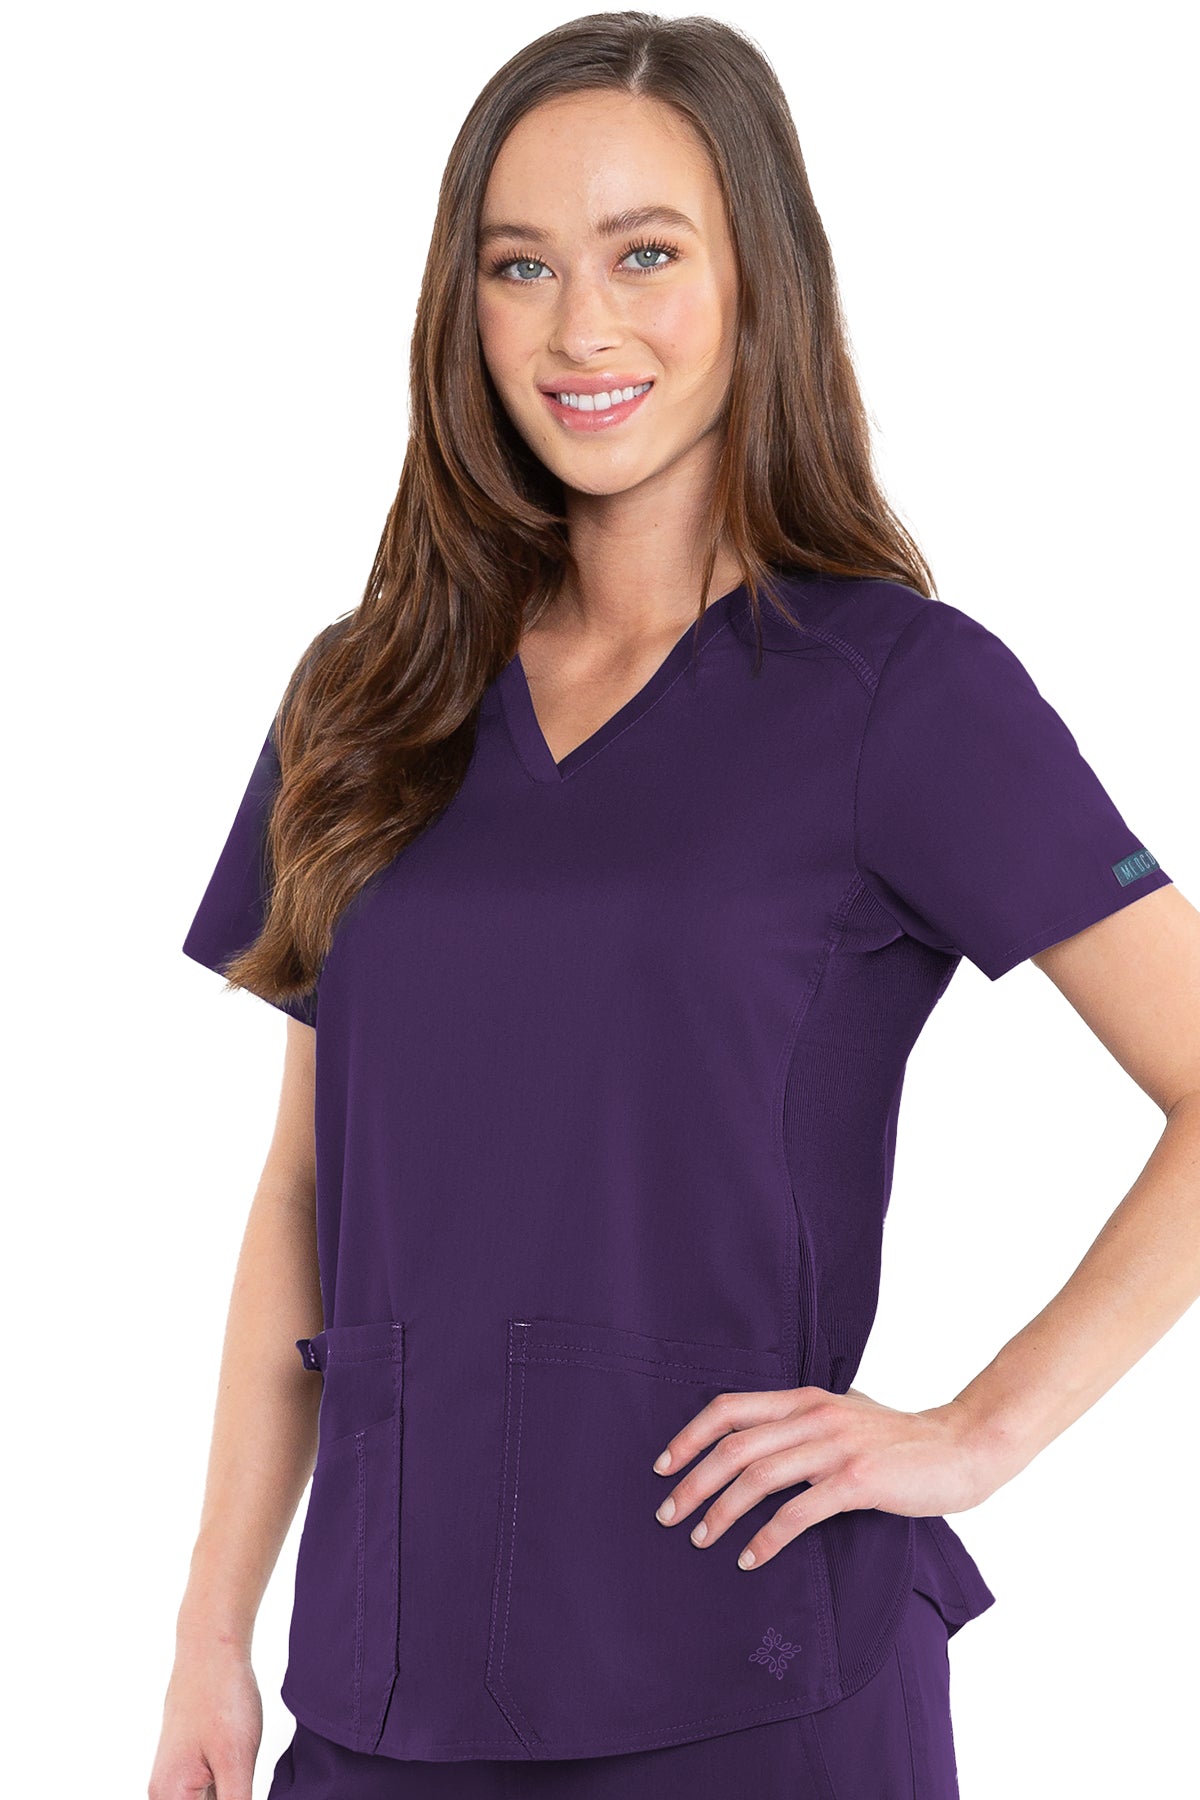 Med Couture V-Neck Shirttail Racerback Top XS-3XL  / Eggplant